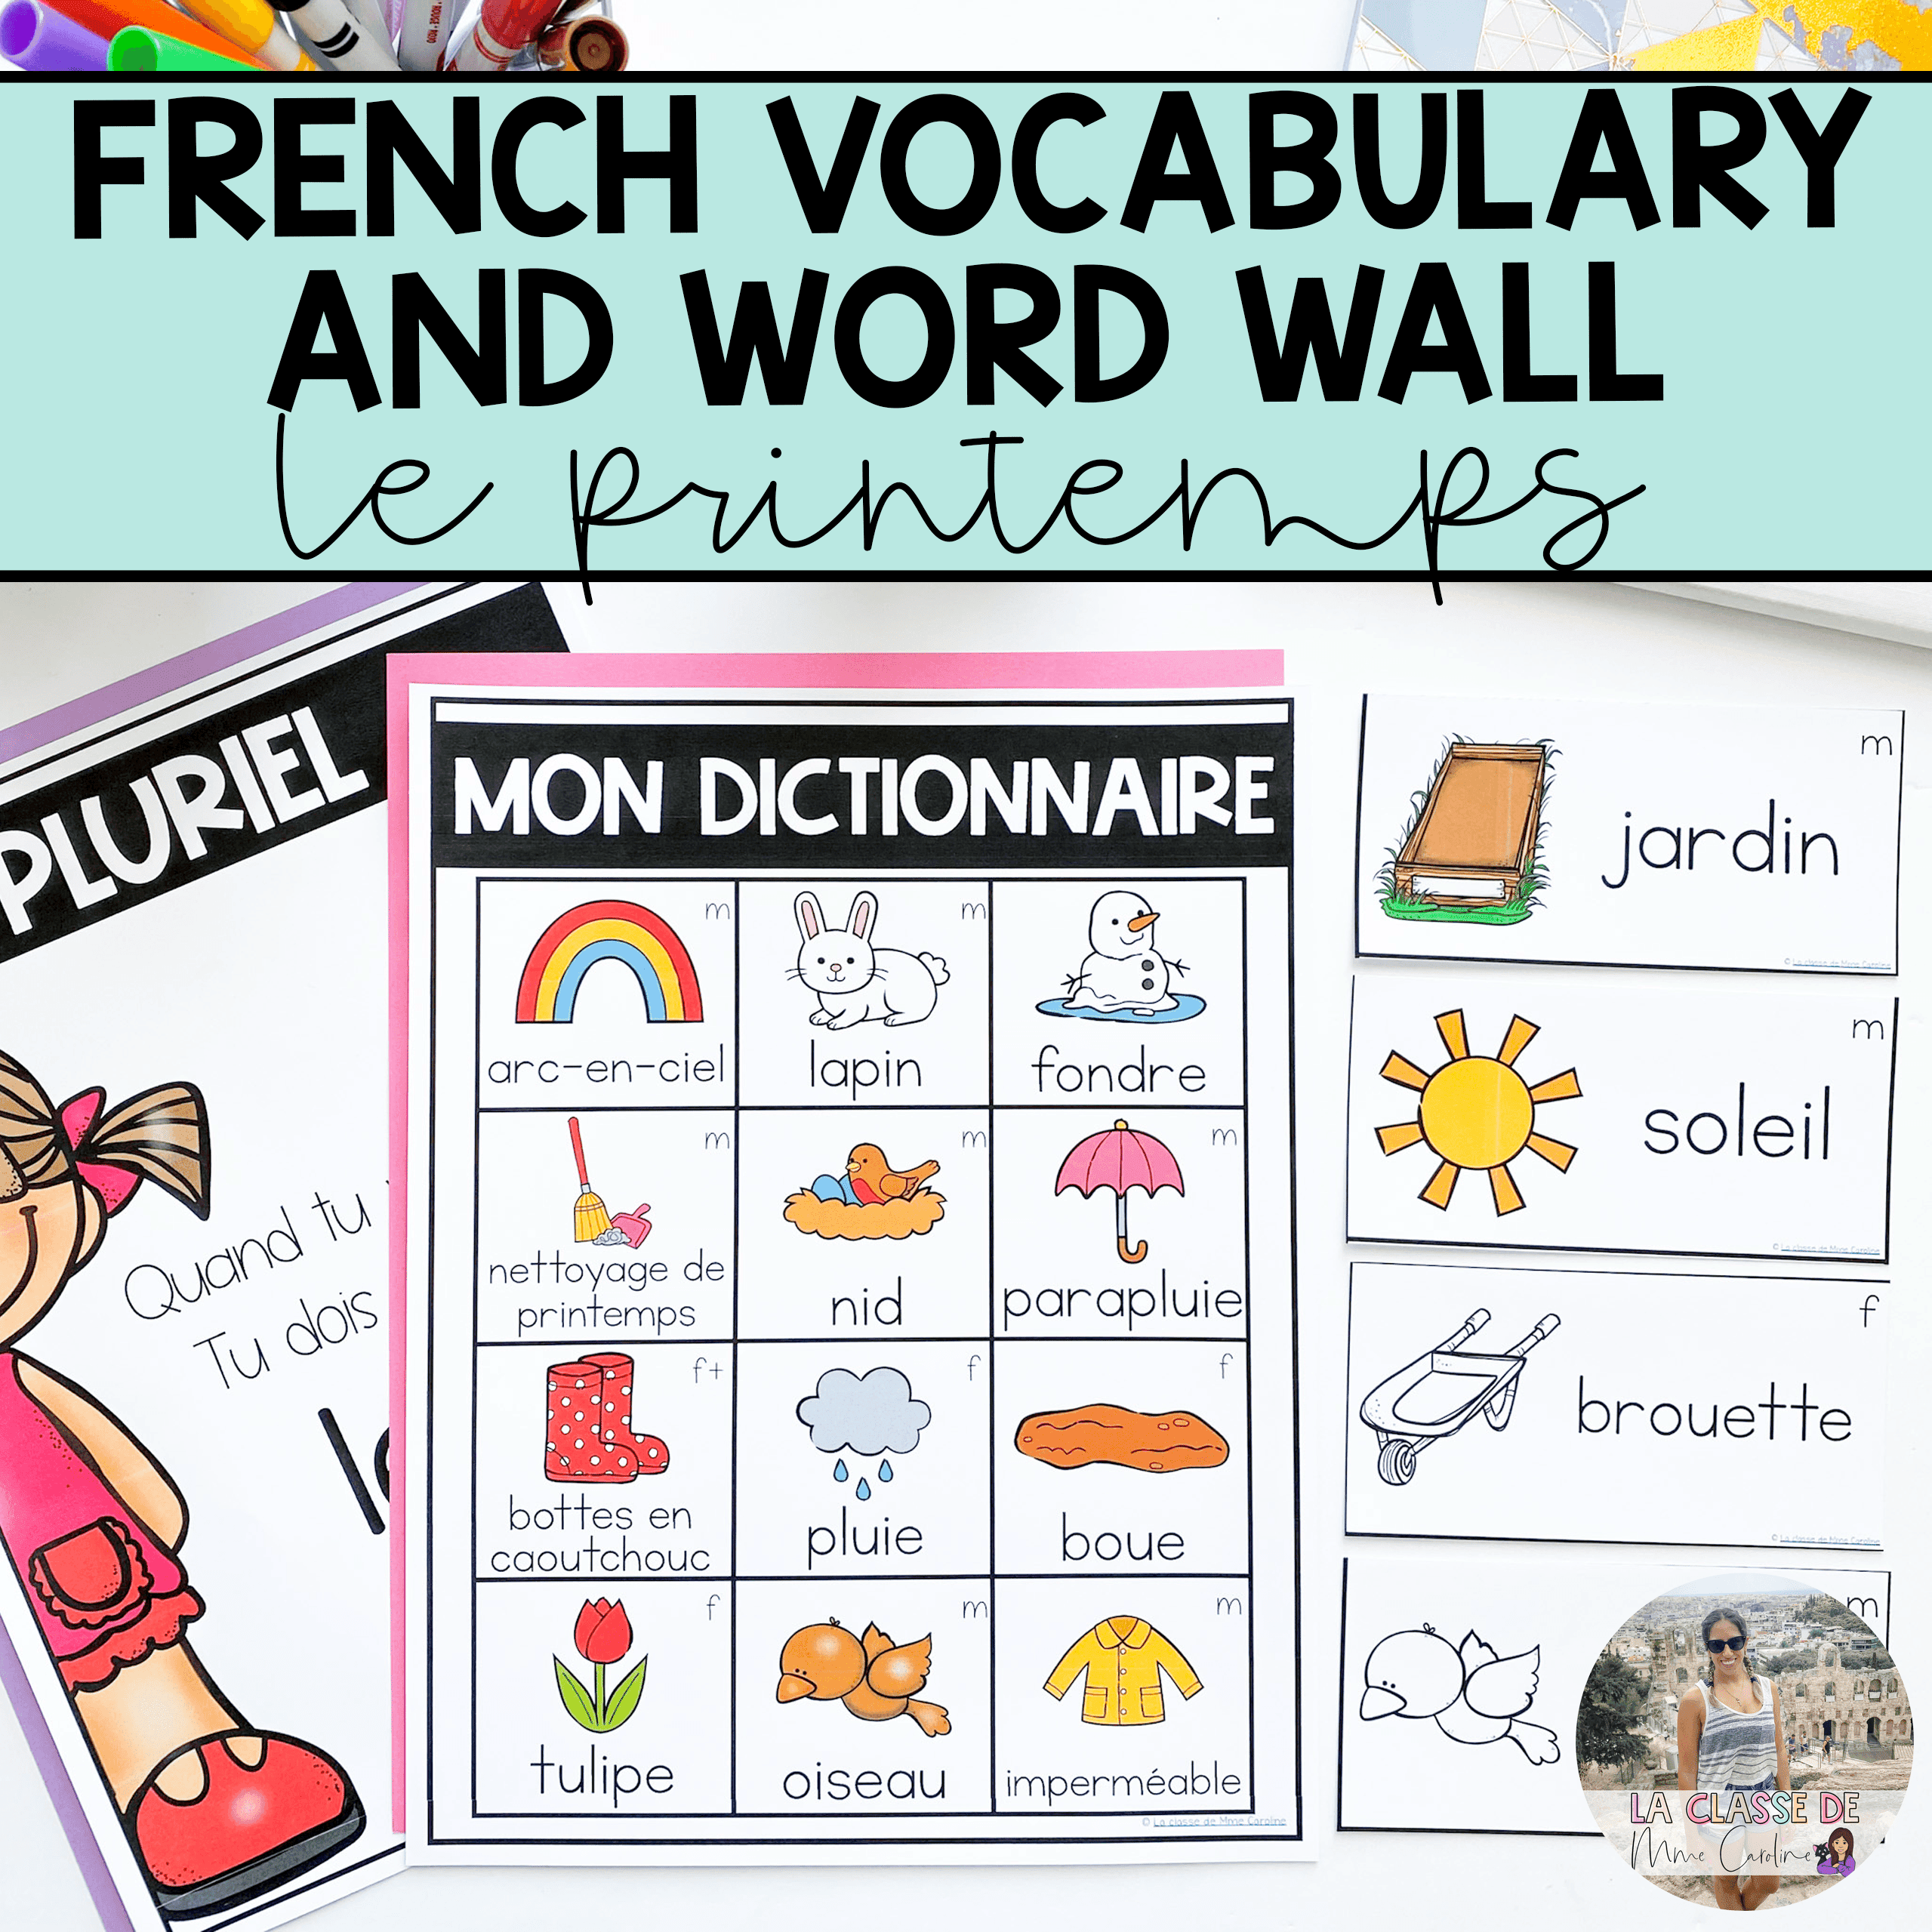 French Vocabulary Illustrated: fronde